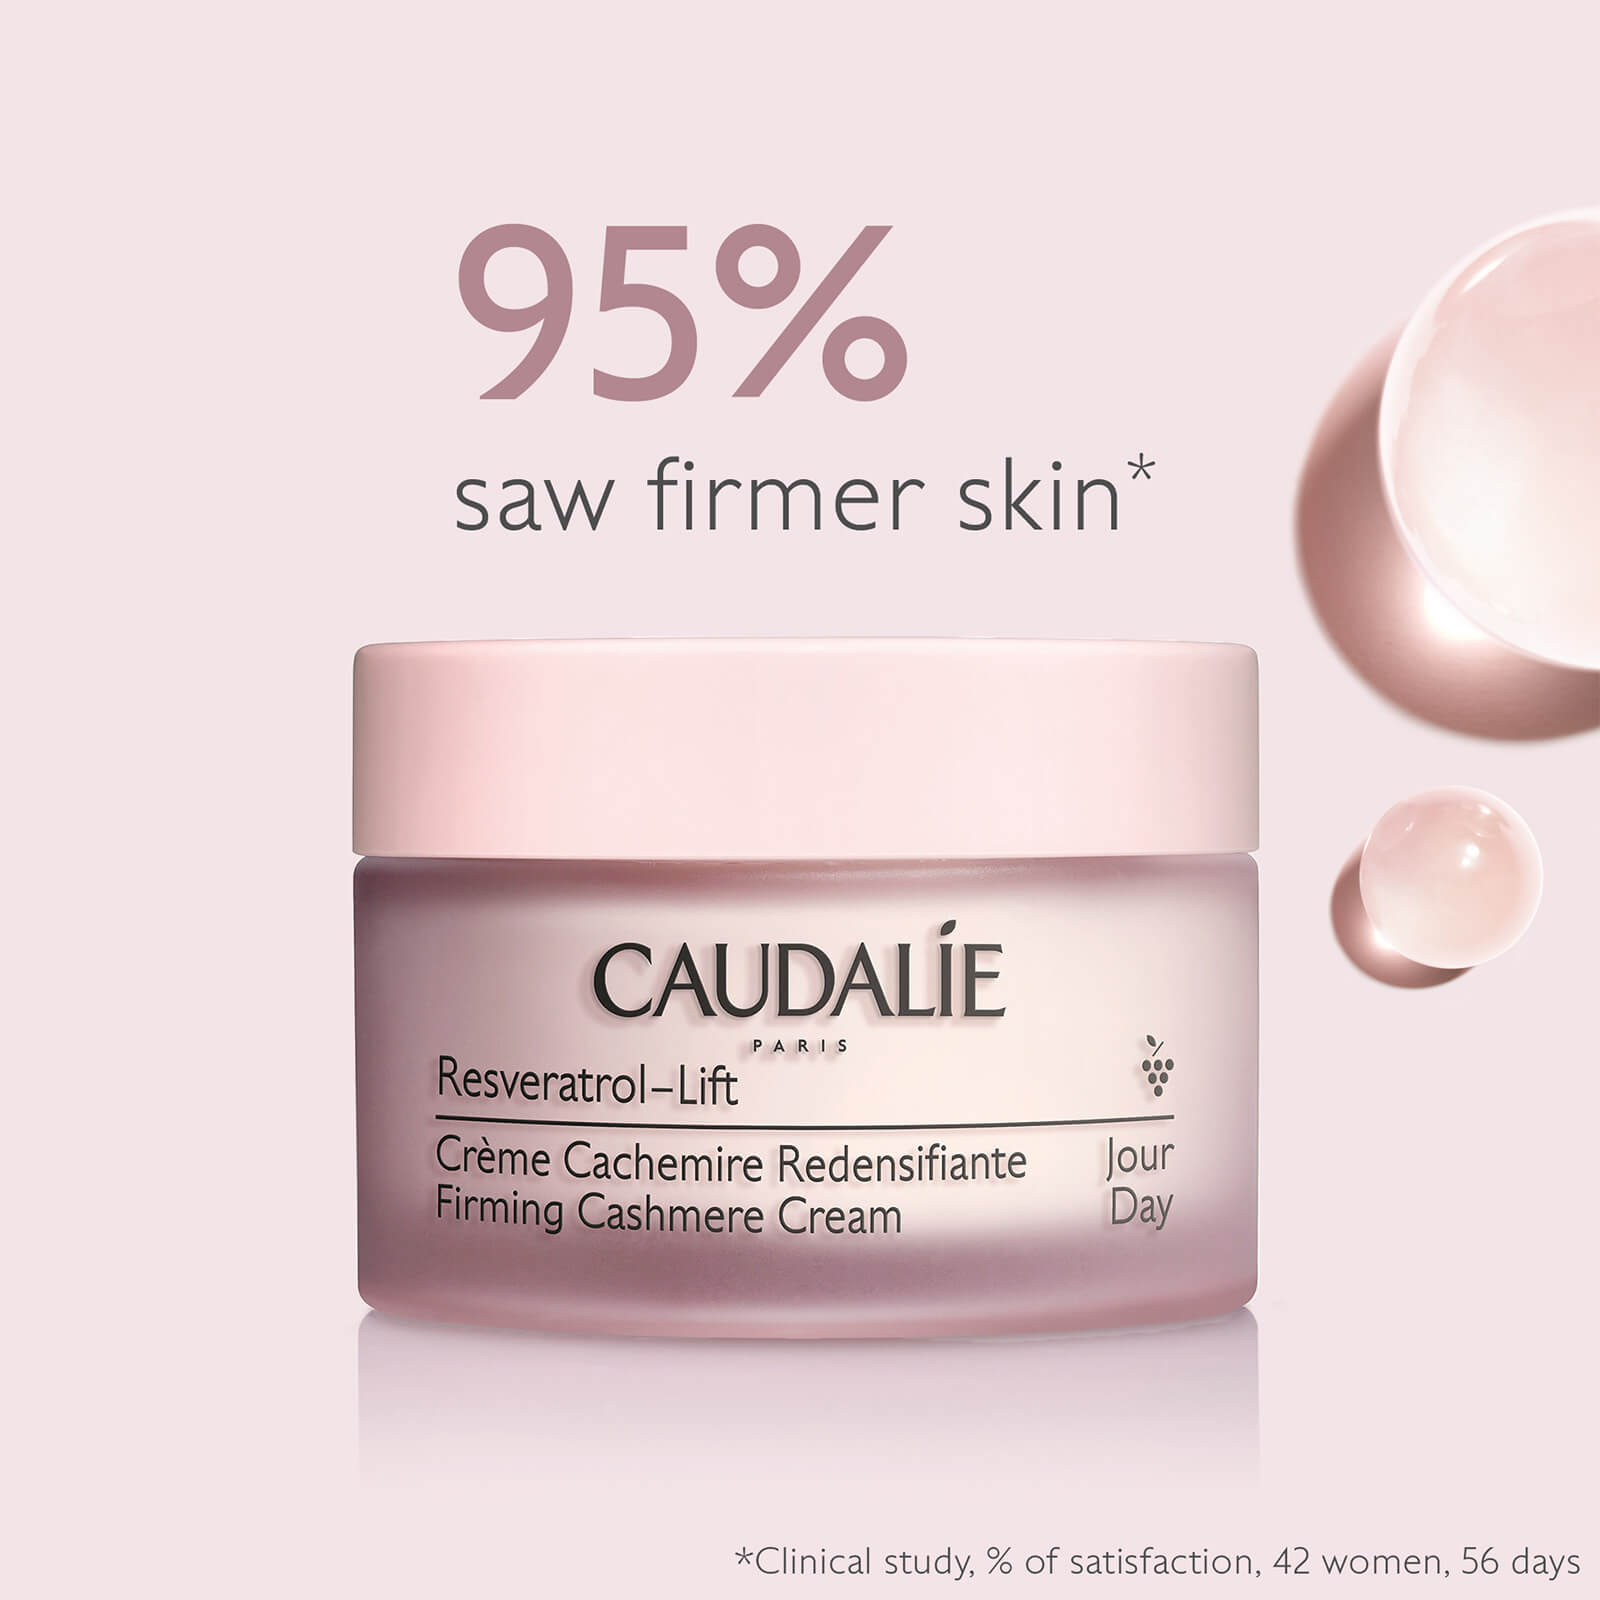 Image 1 -95% saw firmer skin* *Clinical study, % of satisfaction, 42 women, 56 days